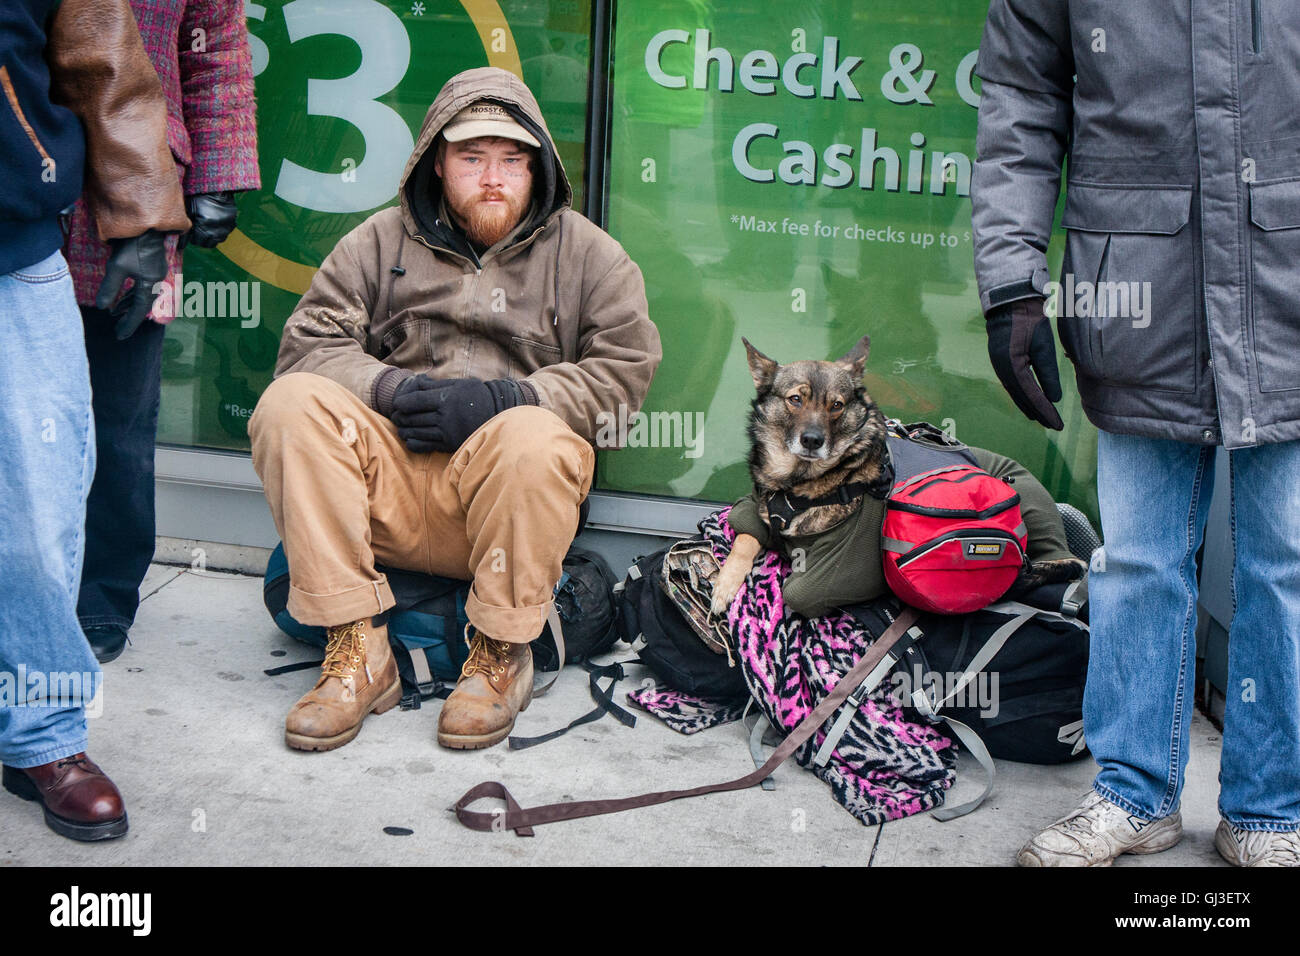 Chicago, Illinois - November 28, 2014: A Chicago homeless man and his dog sit on the sidewalk on a frigid cold day in late November. Stock Photo